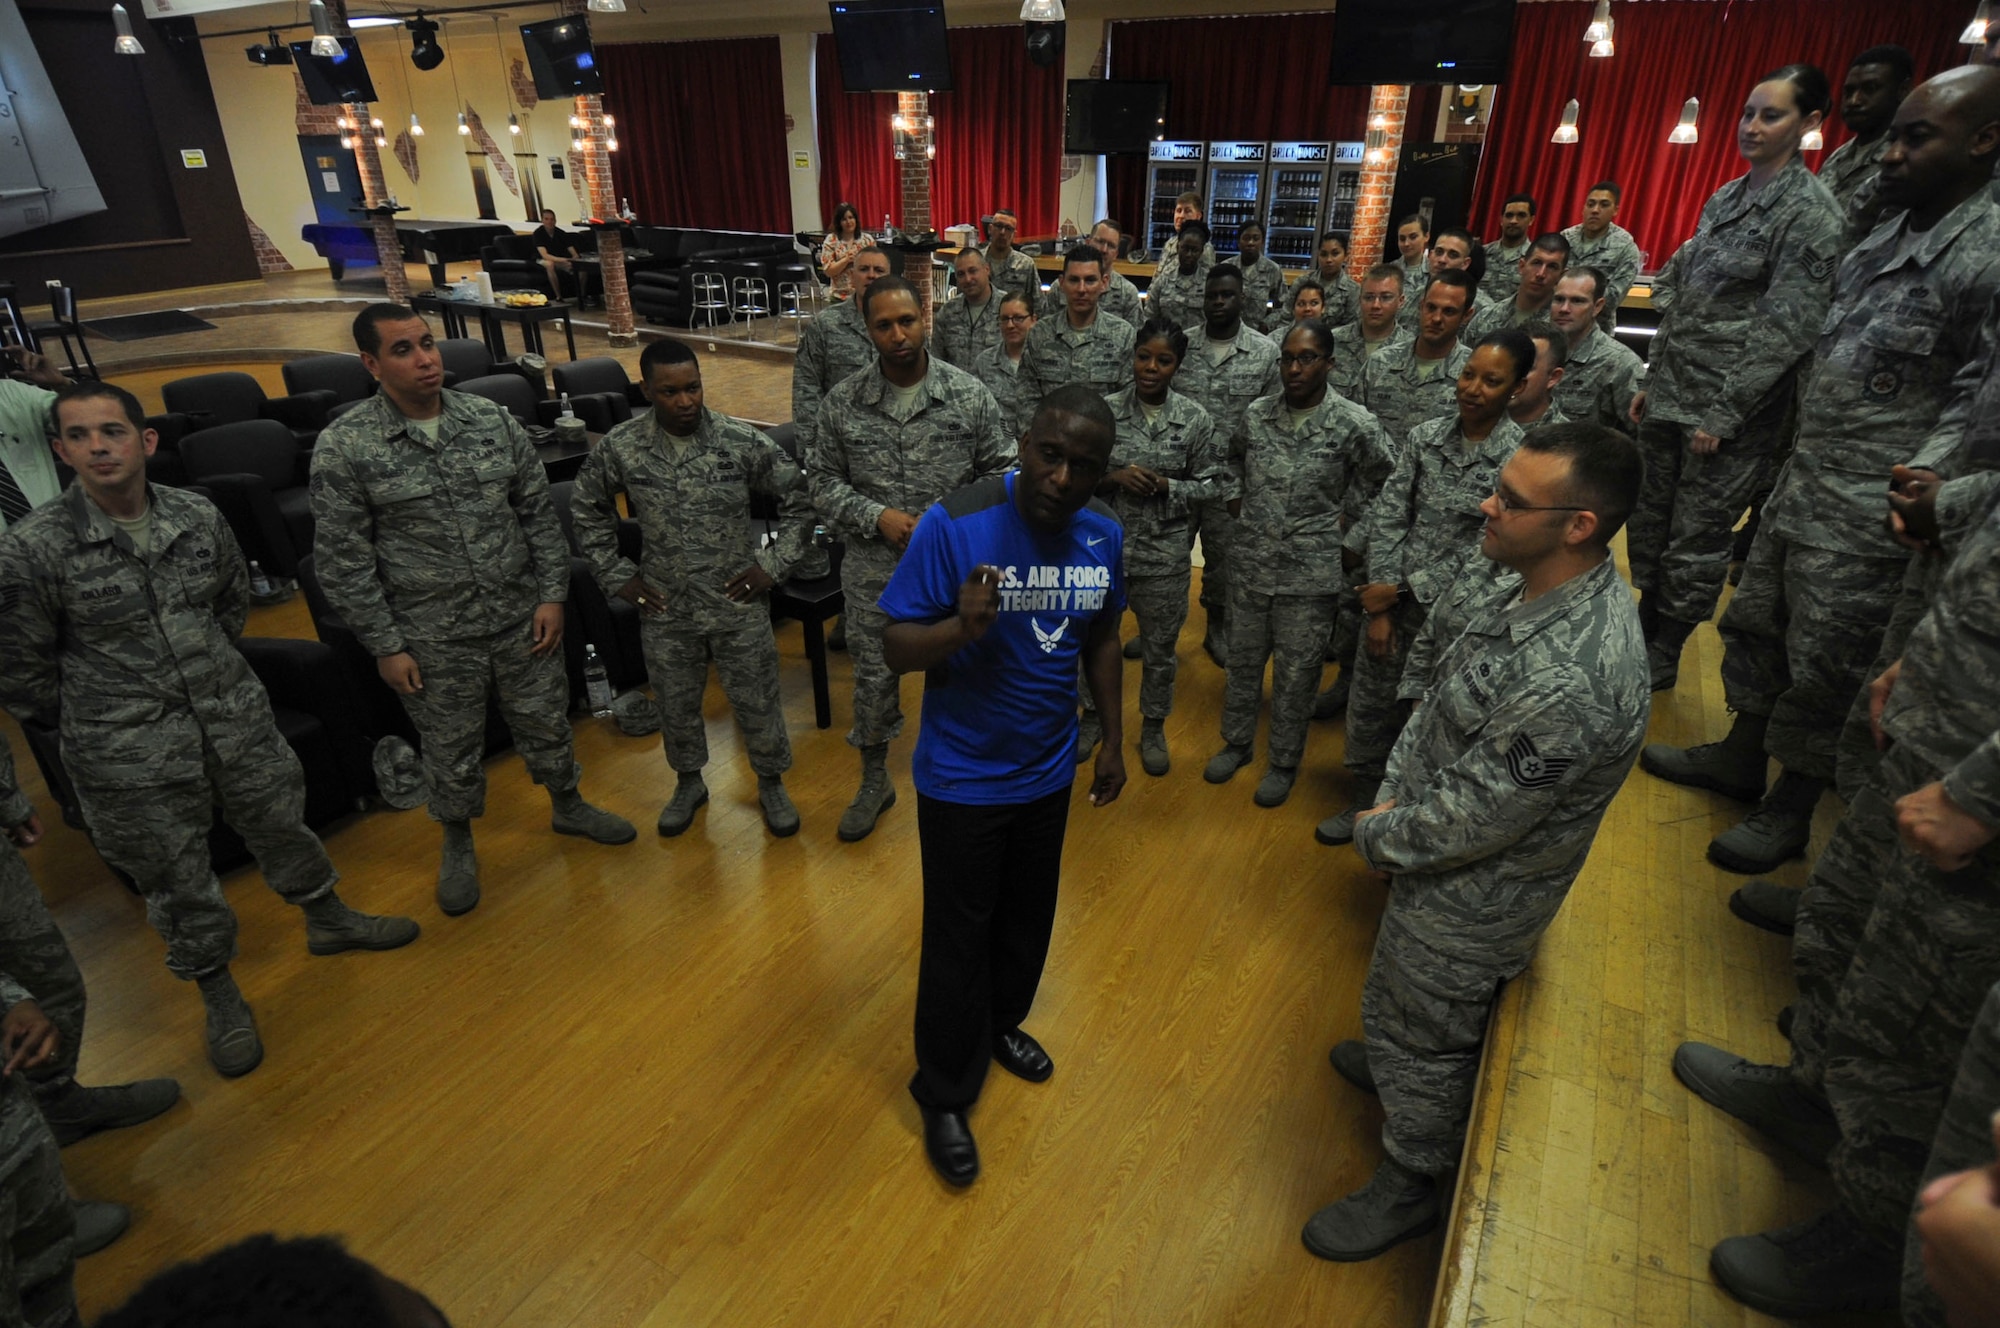 Retired U.S. Air Force Chief Master Sgt. Juan Lewis, known as the Fired Up Chief, speaks to NCOs during a Tier II private organization meeting at the Brick House on Spangdahlem Air Base, Germany, July 12, 2016. Lewis invited the NCOs in the audience to the front of the stage to pose for a group photo at the conclusion of his presentation. (U.S. Air Force Photo by Staff Sgt. Joe W. McFadden/Released)